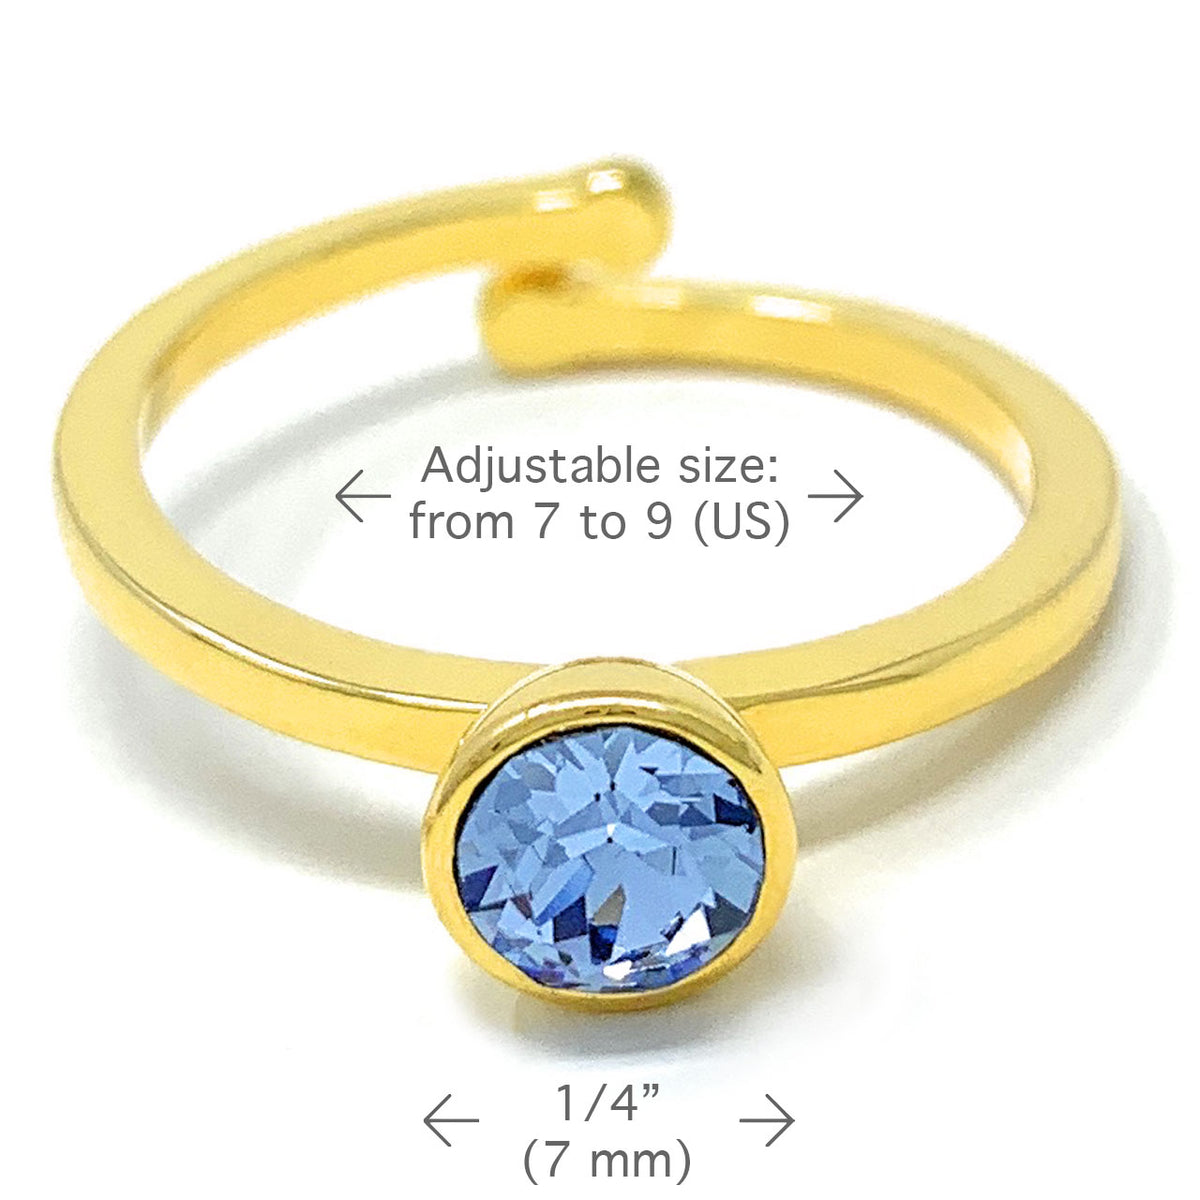 Harley Adjustable Ring with Blue Light Sapphire Round Crystals from Swarovski Gold Plated - Ed Heart